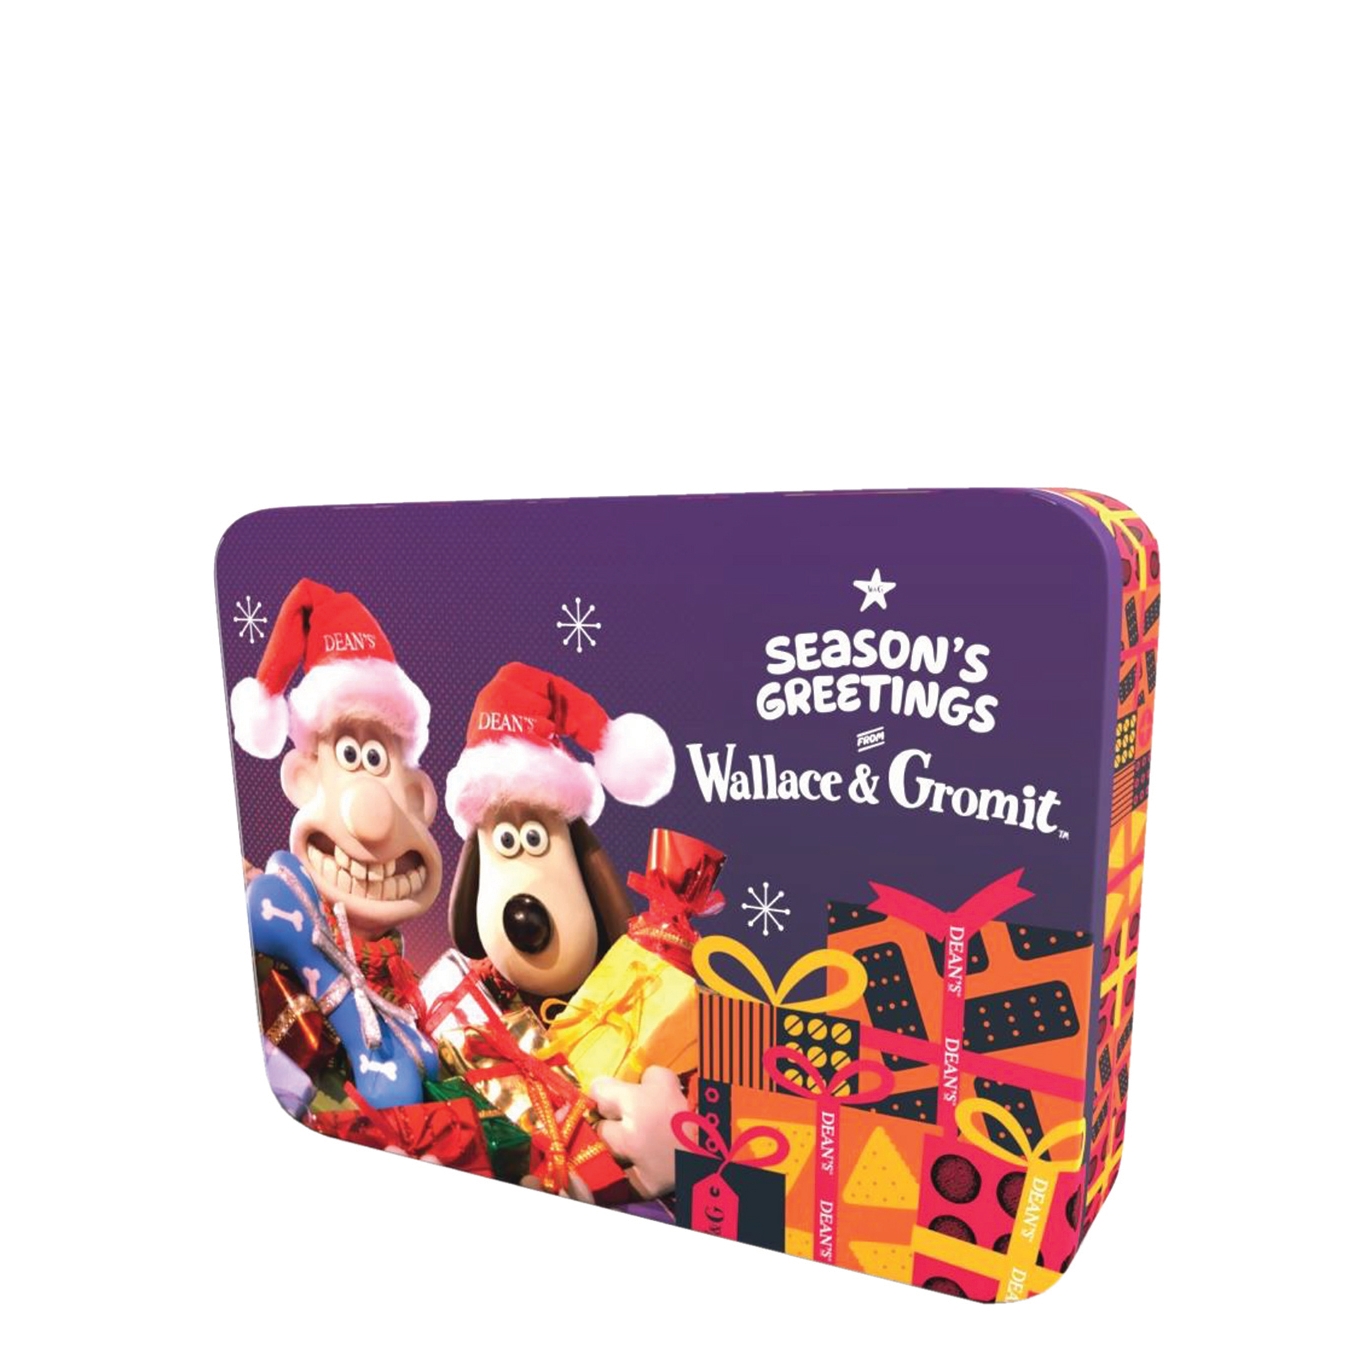 Dean's Wallace & Gromit's Christmas Shortbread Biscuit Tin 400g